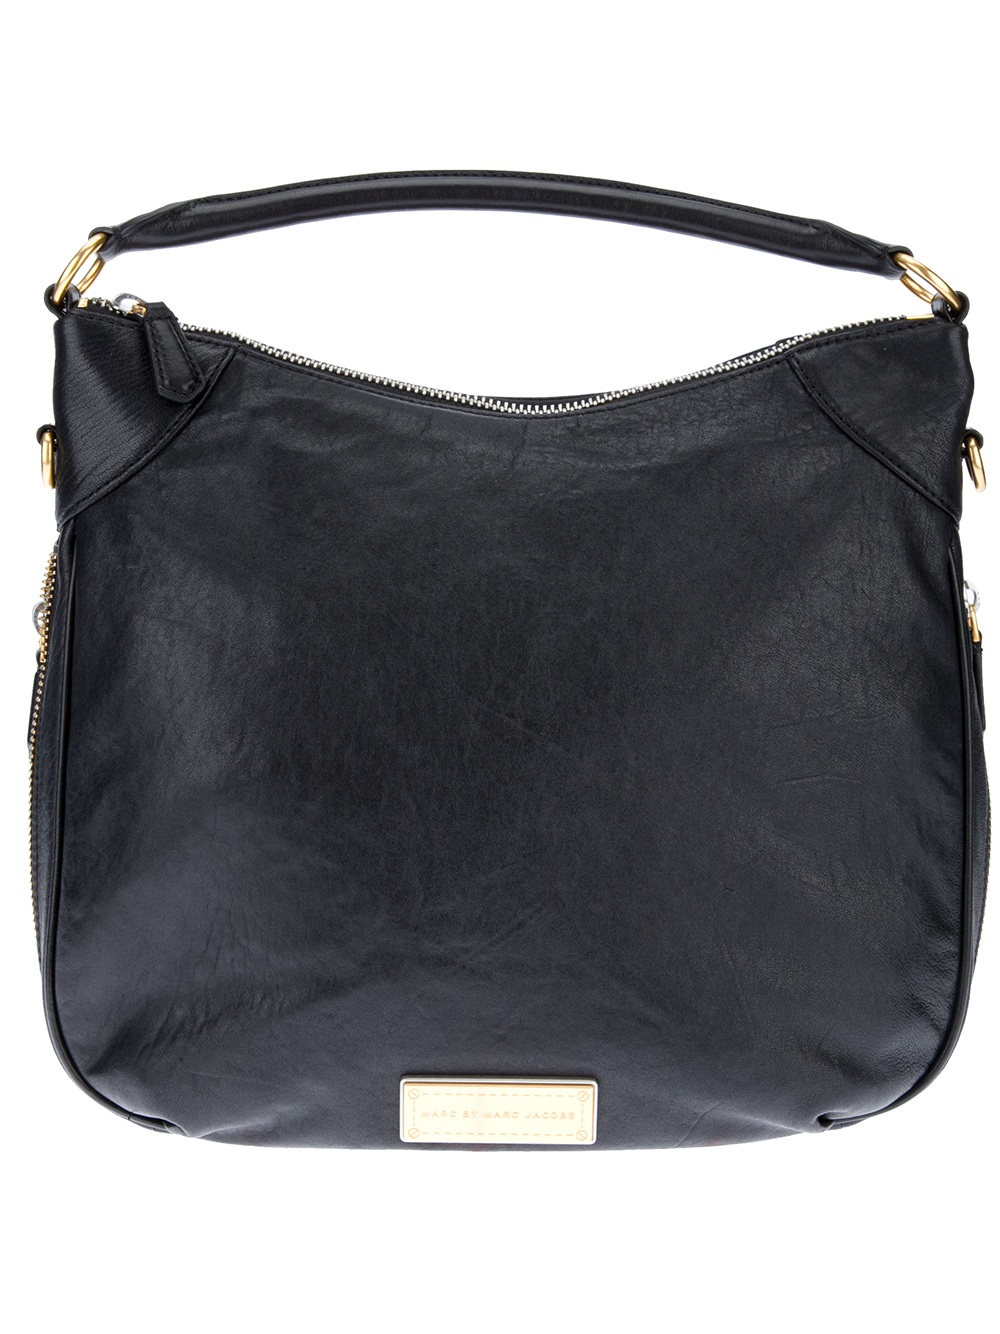 Lyst - Marc By Marc Jacobs Billy Bag in Black